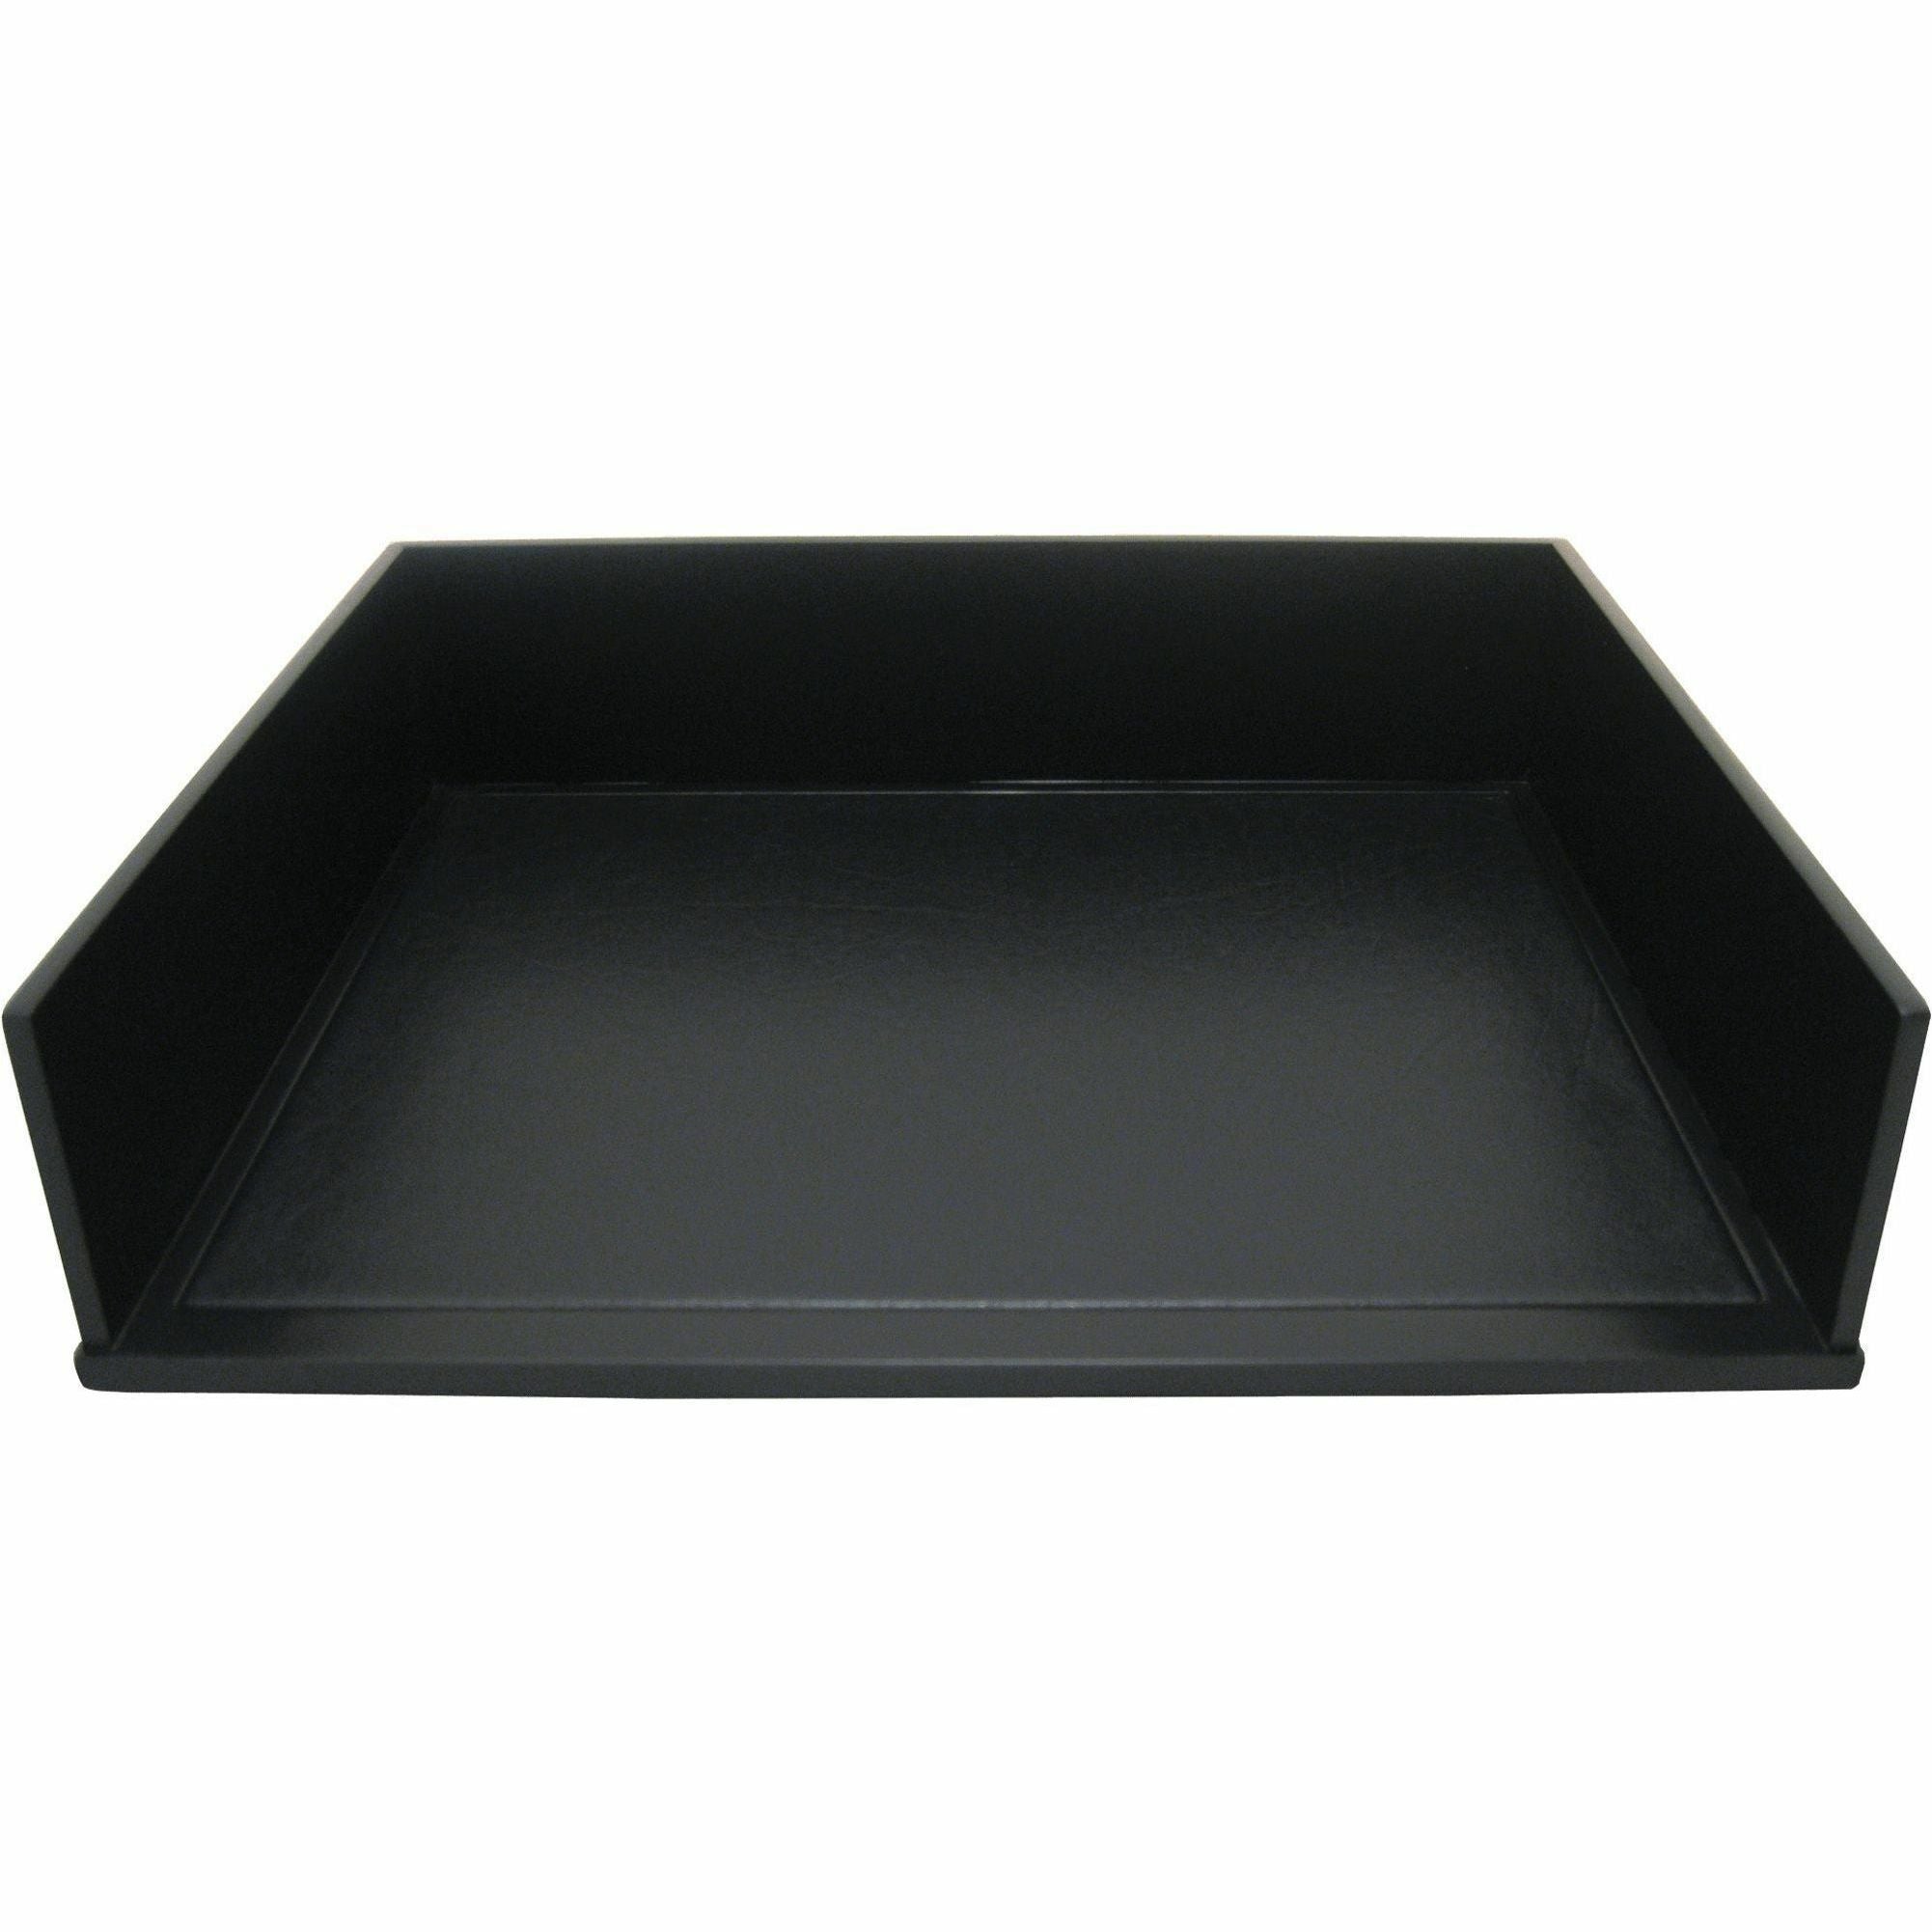 Victor 1154-5 Midnight Black Stacking Letter Tray - Desktop - Black - Wood, Faux Leather - 1Each - 